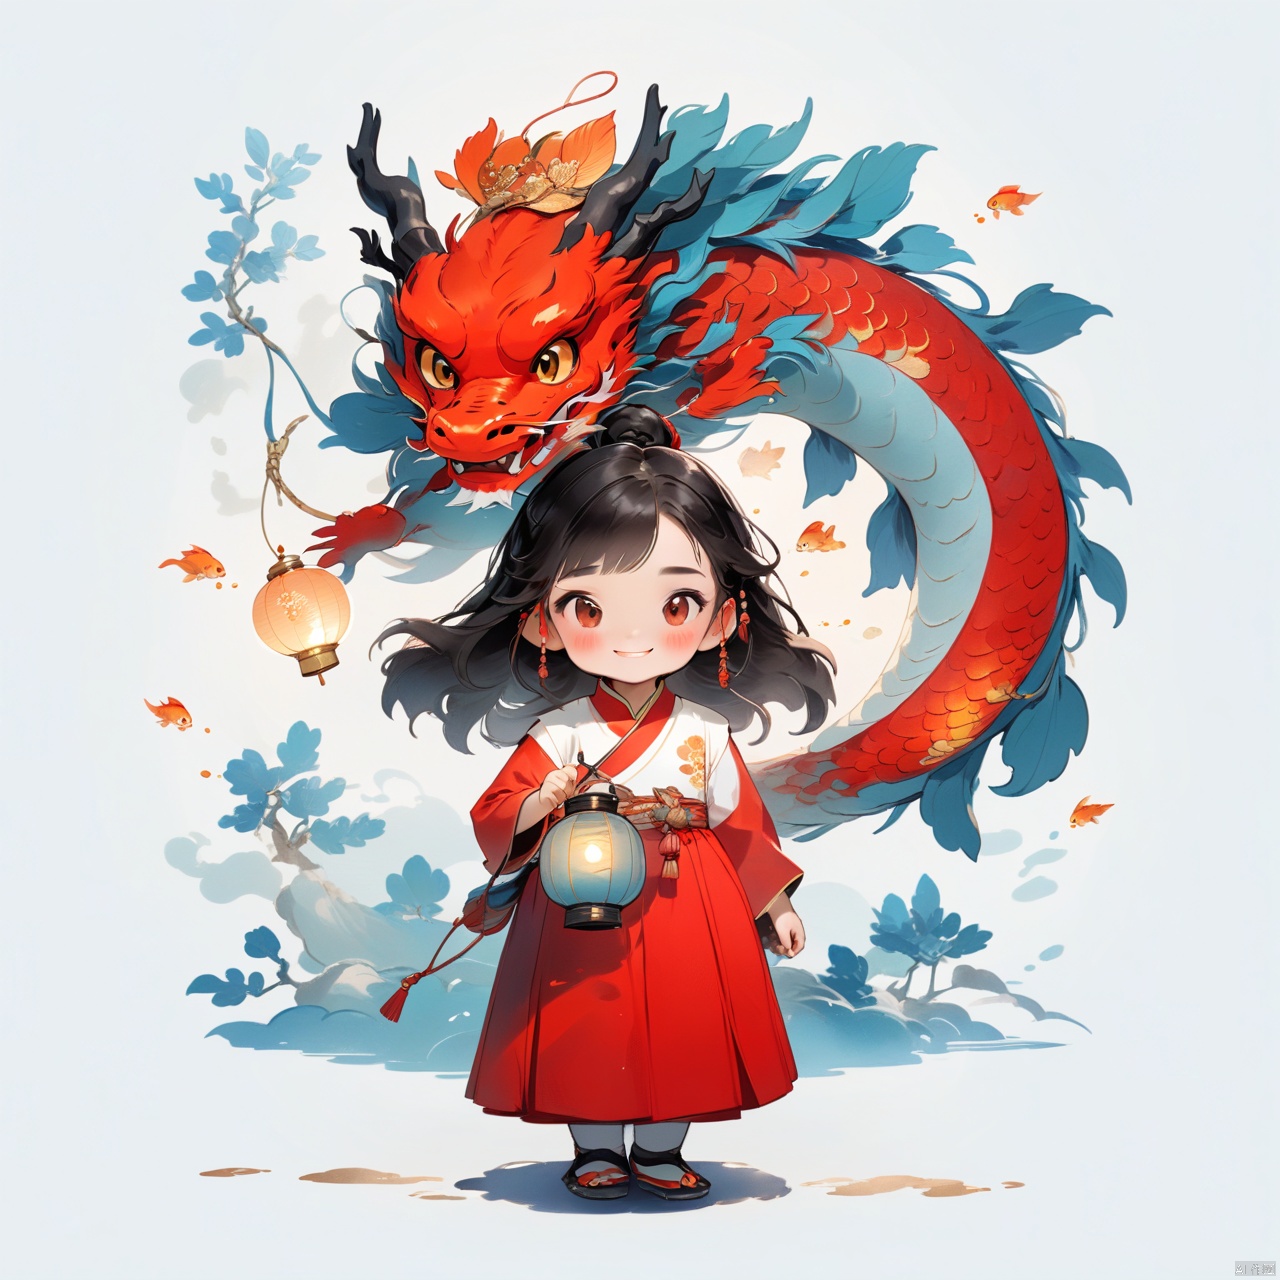  A girl in traditional Chinese red clothing ,a red dragon behind her, dradon,gold eyes,
Chinese style, guofeng,A good girl holds a lantern ,smiles. goldfish around